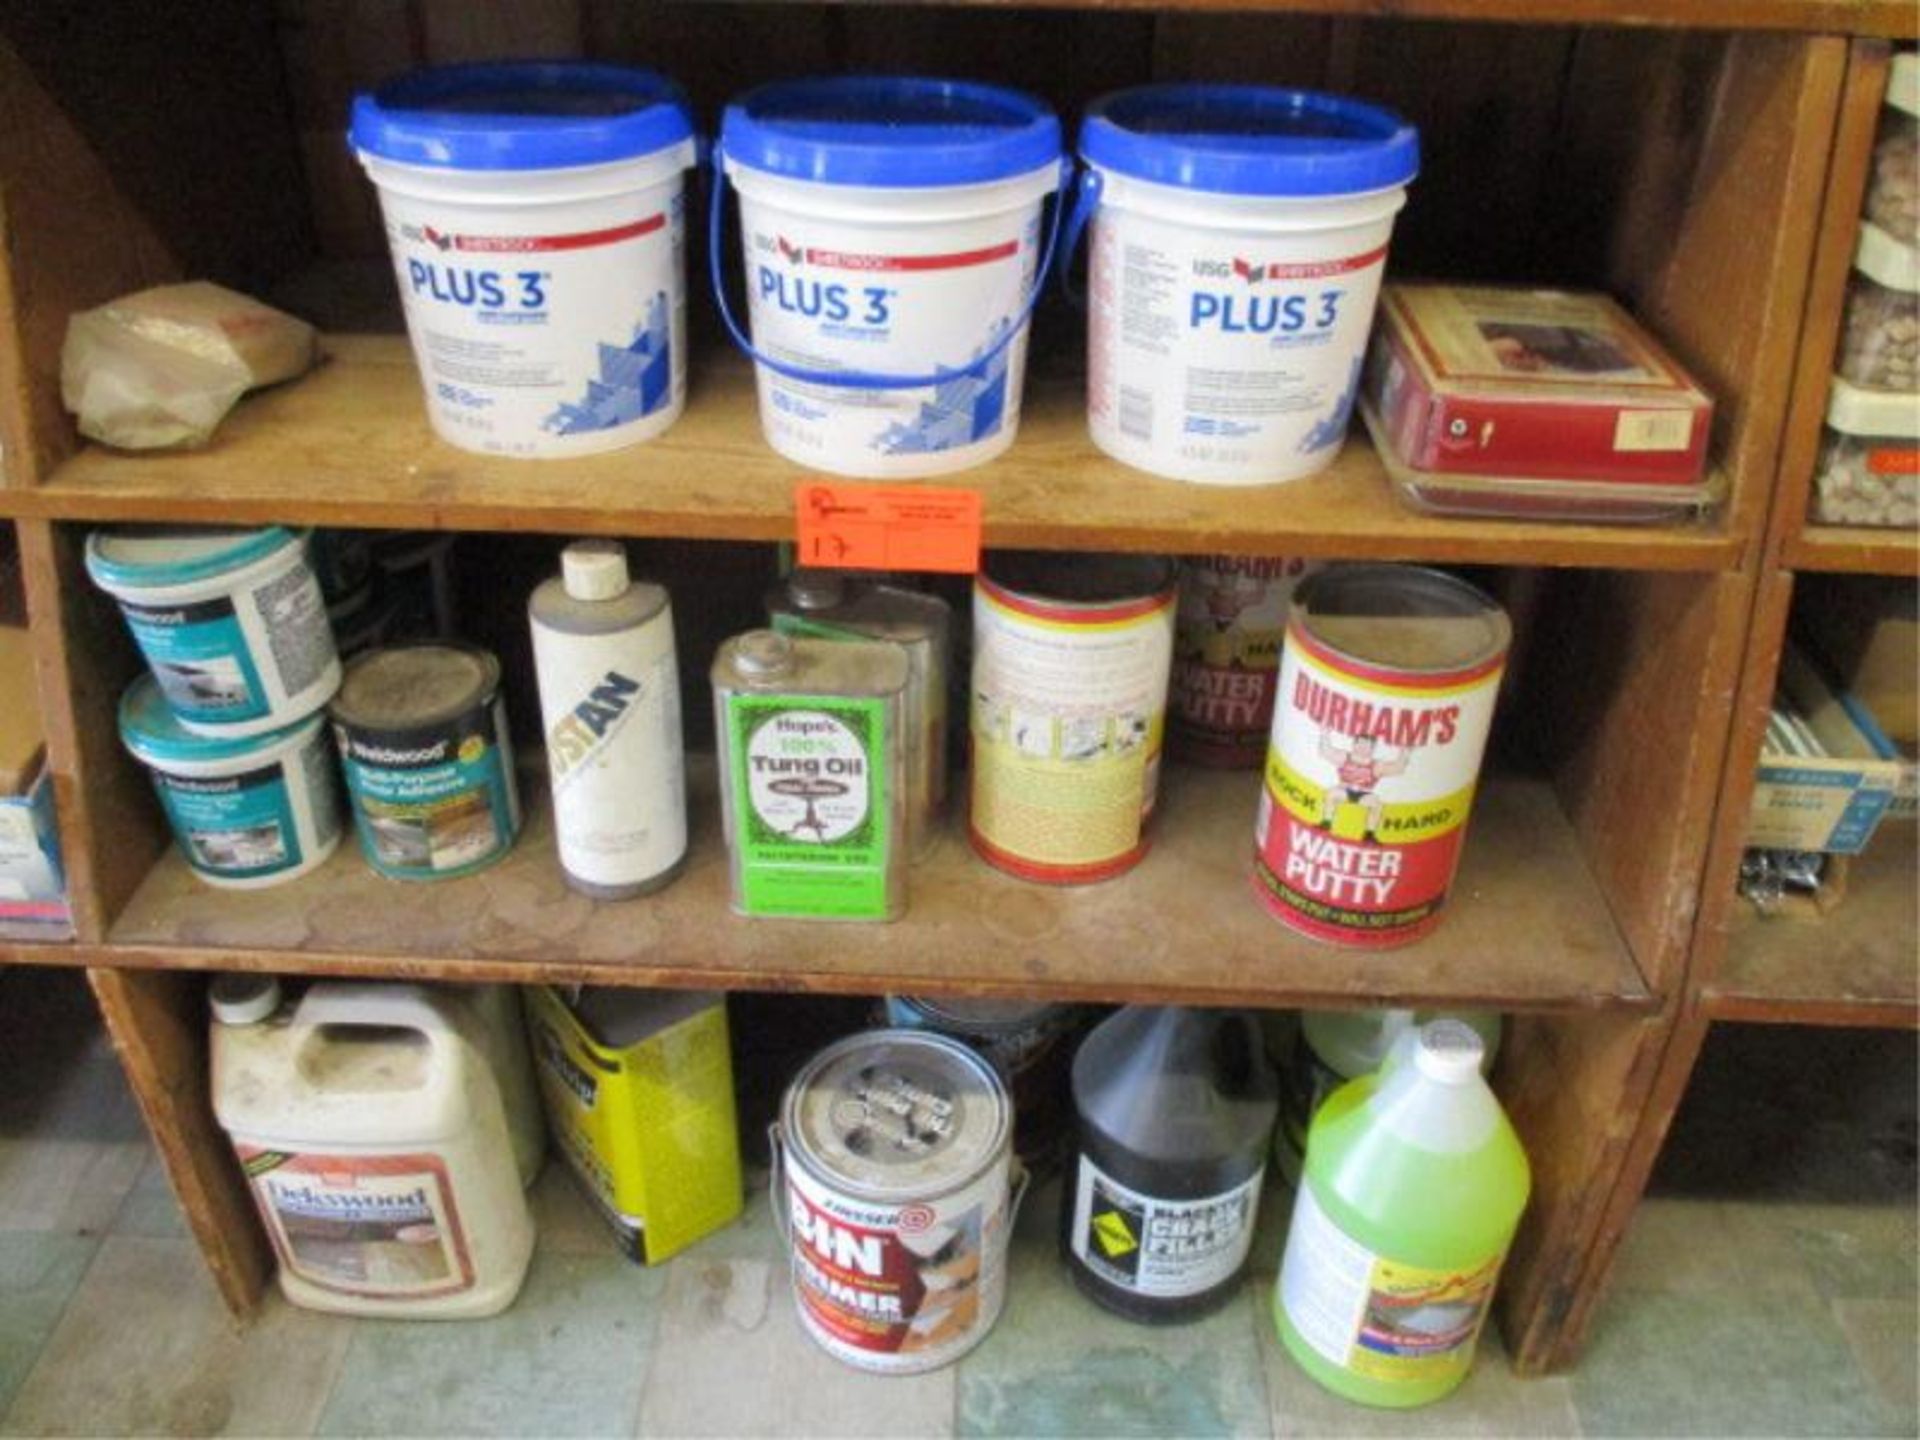 3 Shelves w/ Joint Compound, Water Putty, Tung Oil, Floor Adhesive, Deck Cleaner, Zip-Strip, B-I-N - Image 2 of 10